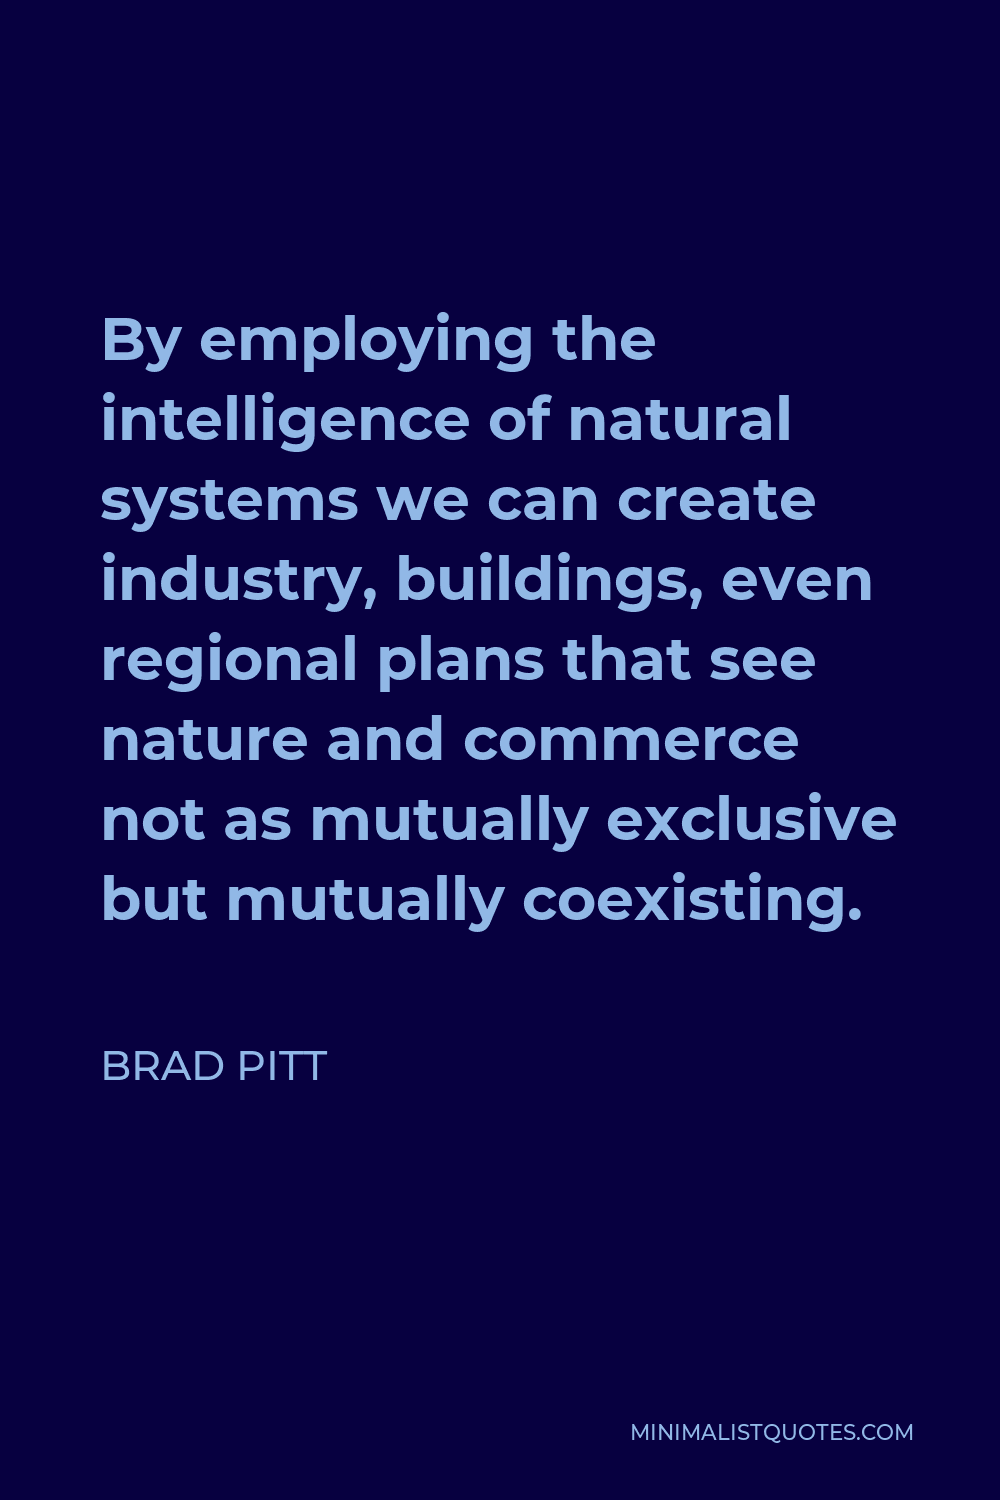 Brad Pitt Quote - By employing the intelligence of natural systems we can create industry, buildings, even regional plans that see nature and commerce not as mutually exclusive but mutually coexisting.